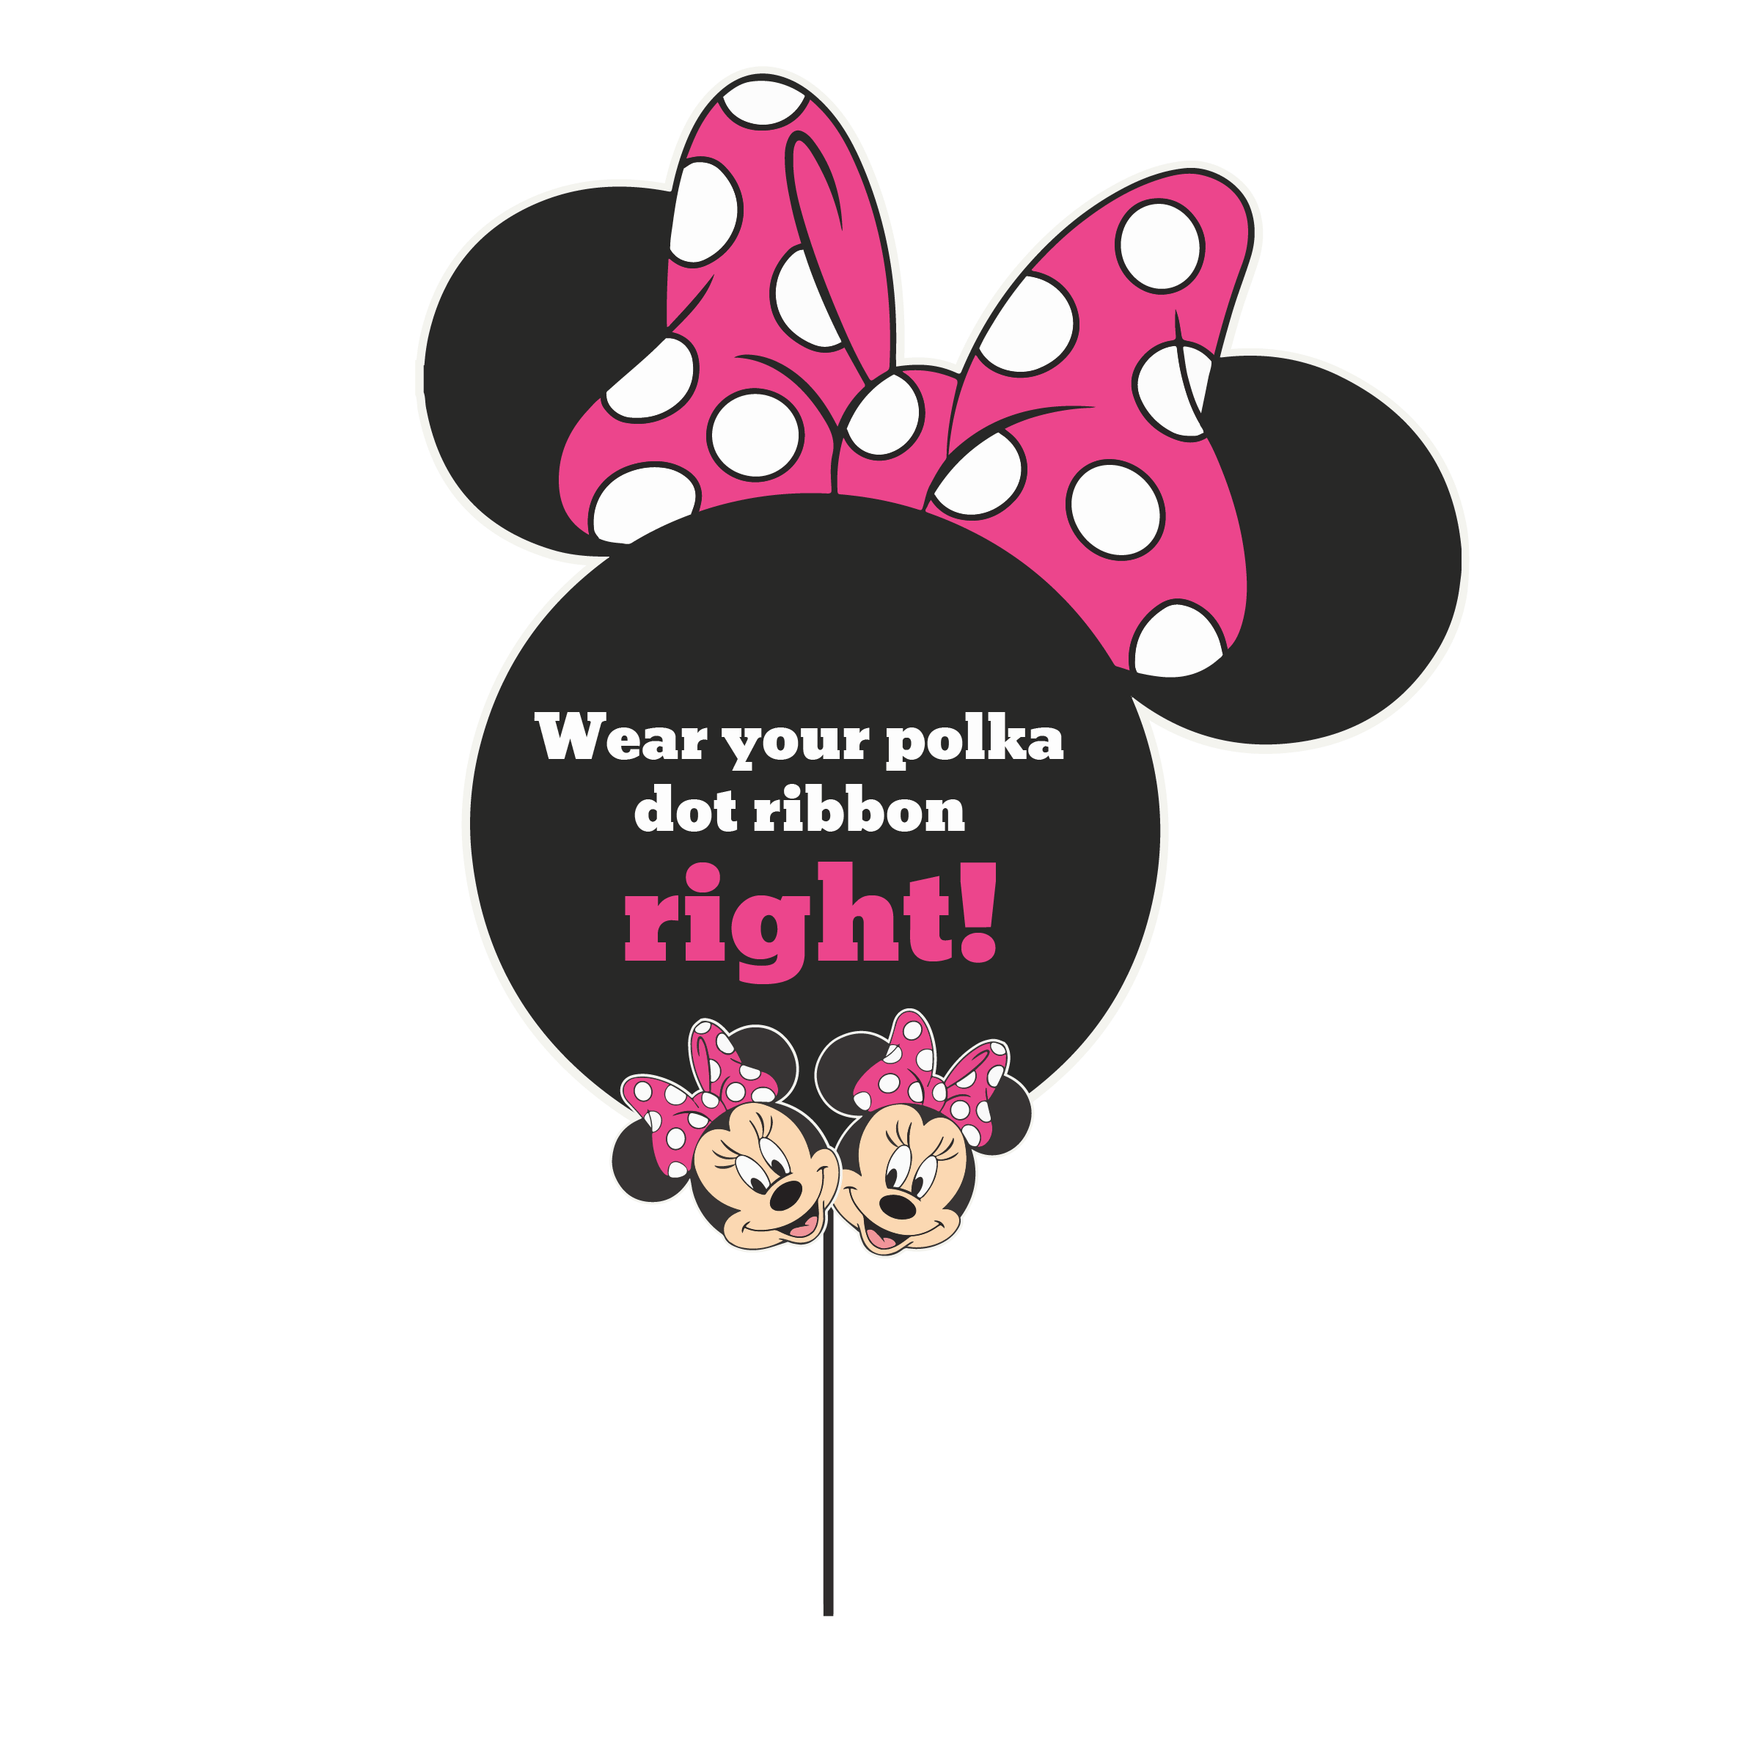 Minnie Mouse Cake Topper in Illustrator, PNG, JPG, EPS, SVG - Download